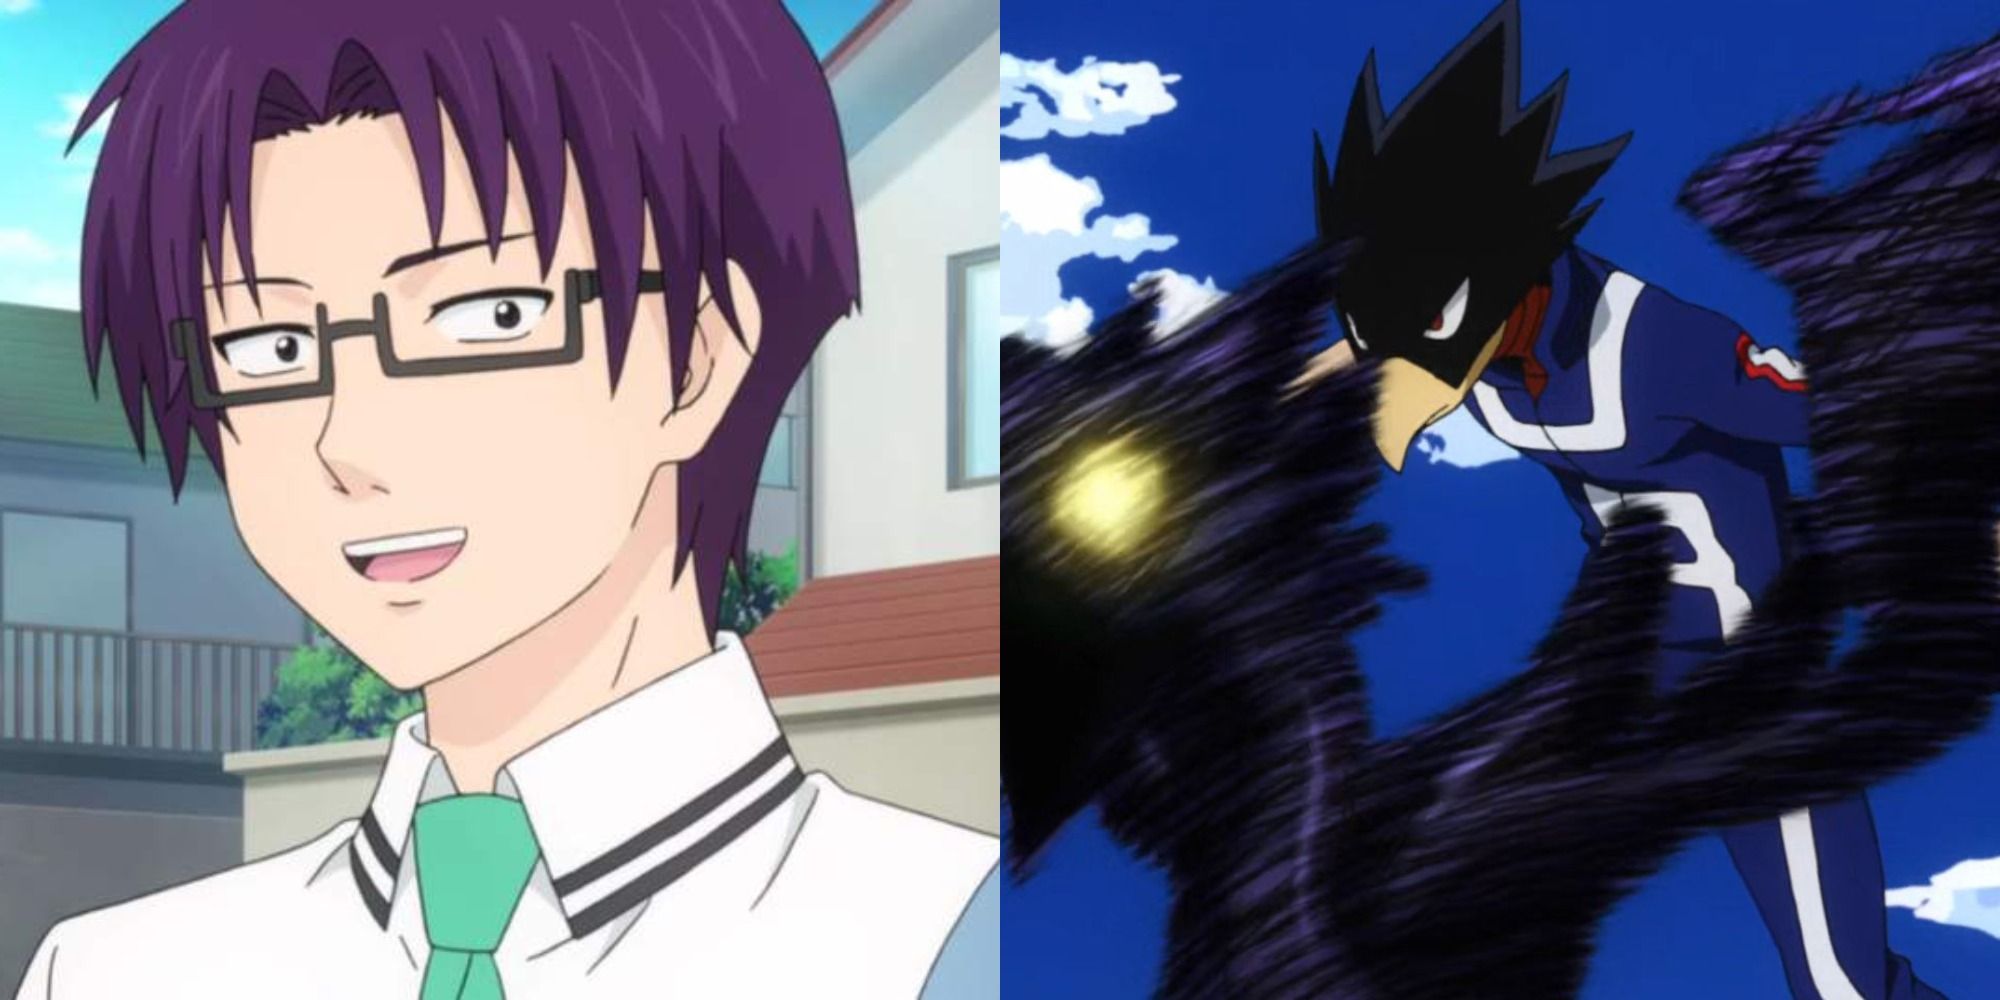 Split image showing two anime characters